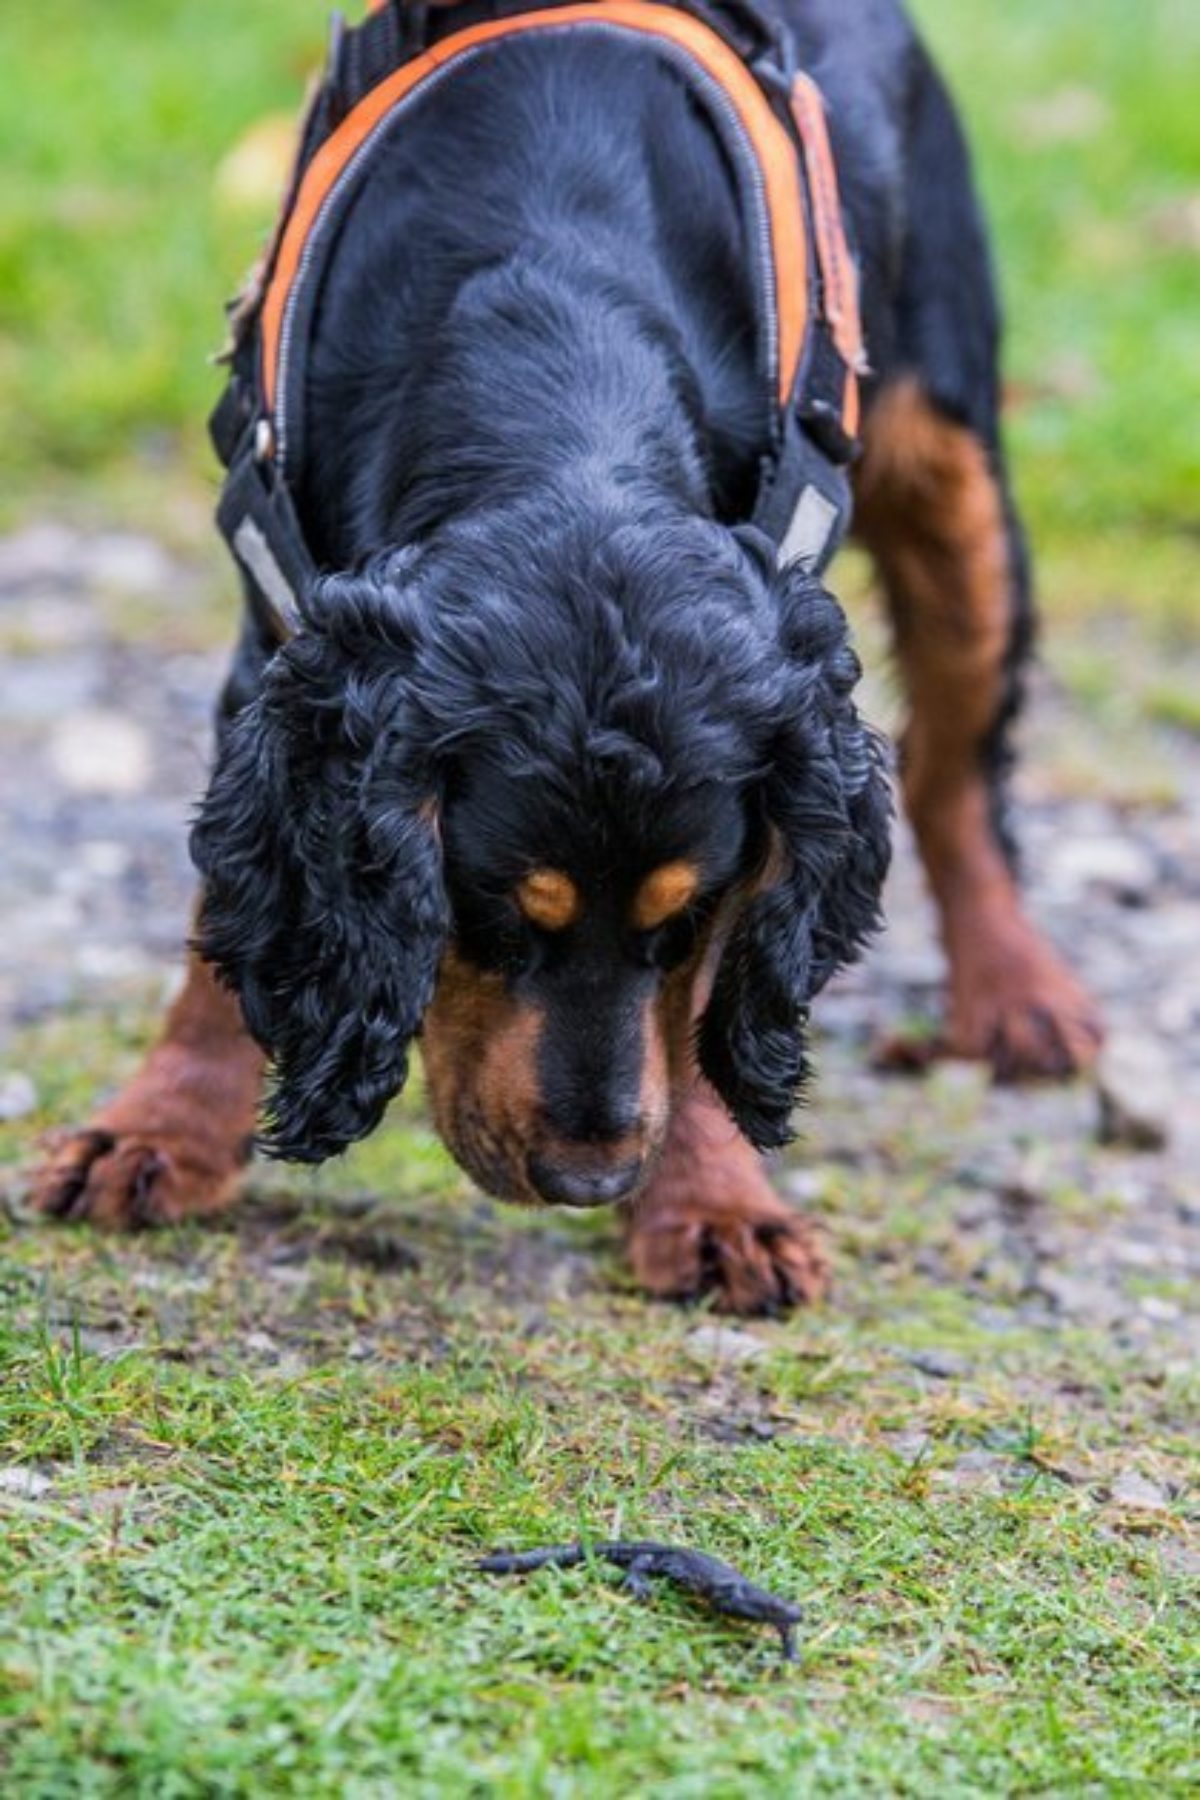 great crested newt detection dog